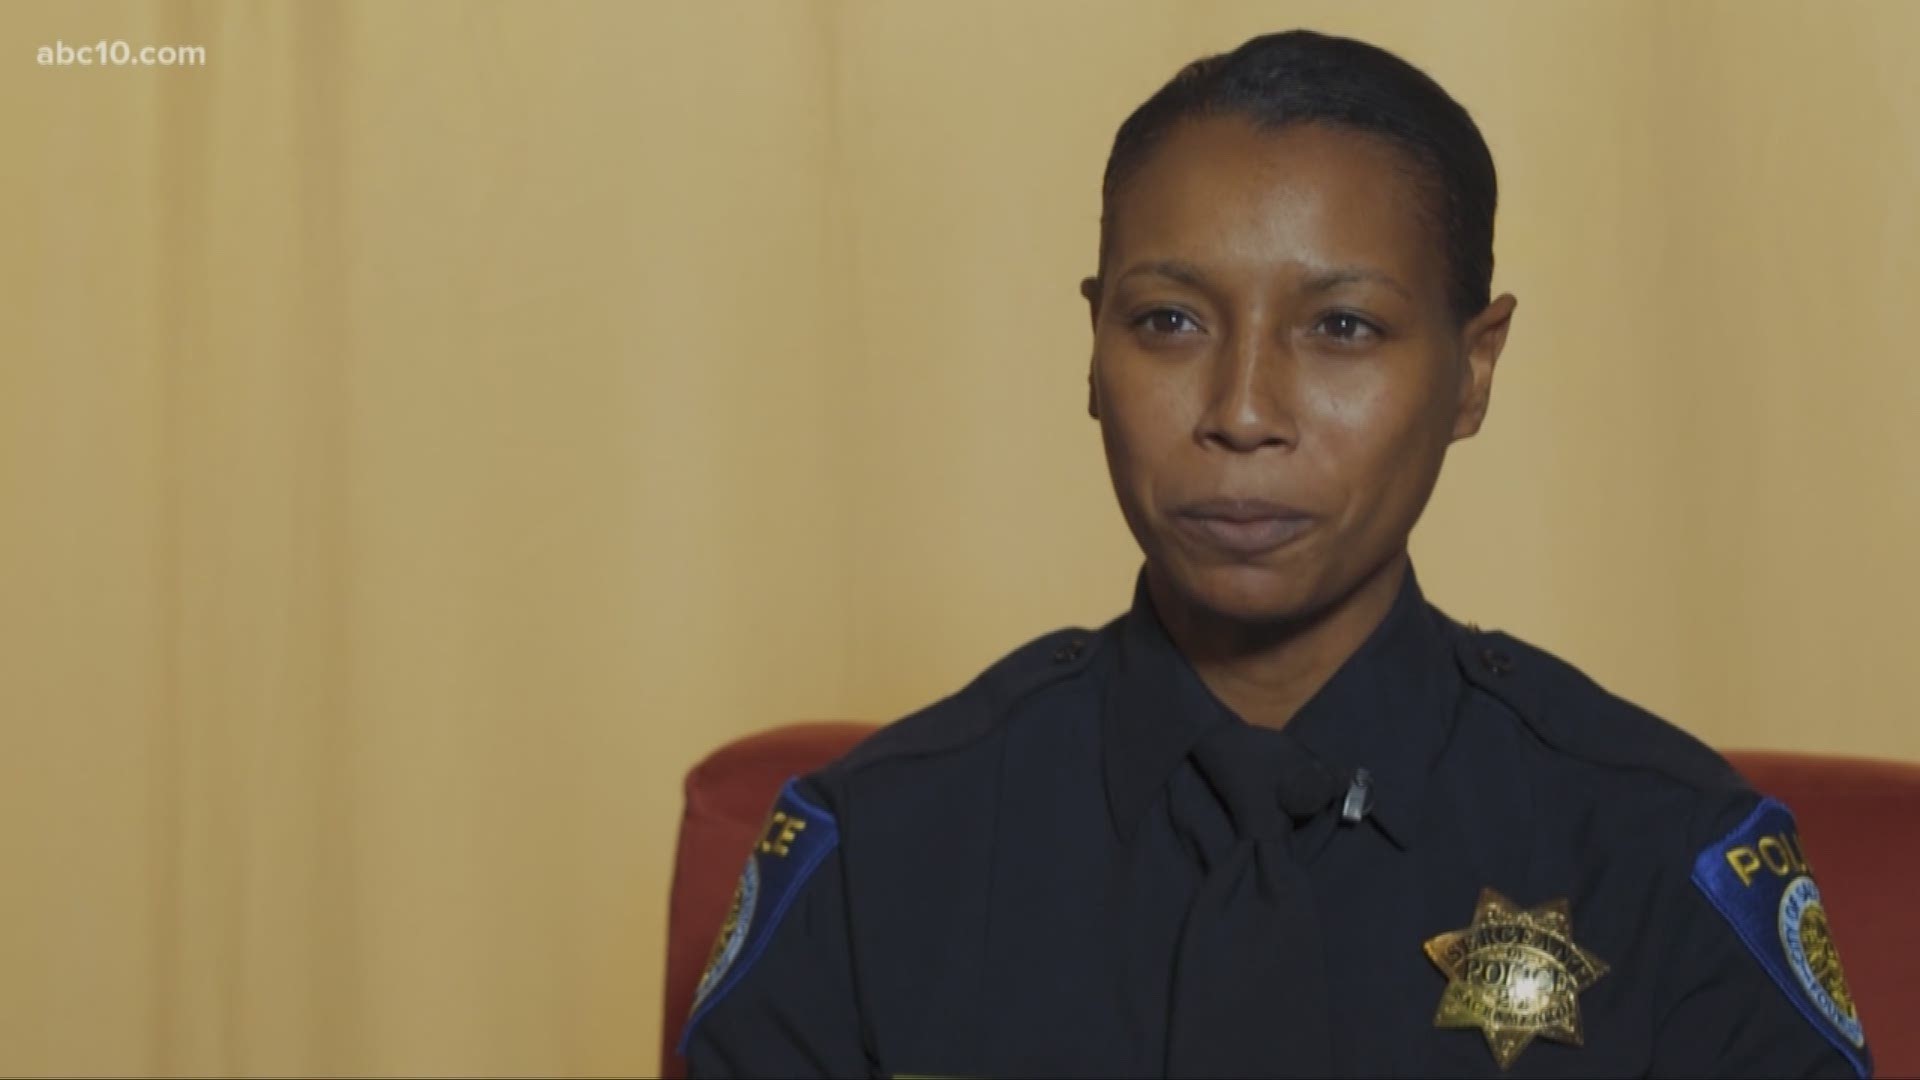 ABC10 spoke with the outgoing and incoming public information officer for the Sacramento Police Department. Viewers may be familiar with the outgoing spokesperson, Lt. Vance Chandler, who had another big headline to announce: the department’s first female sergeant public information officer, Sgt. Sabrina Briggs.